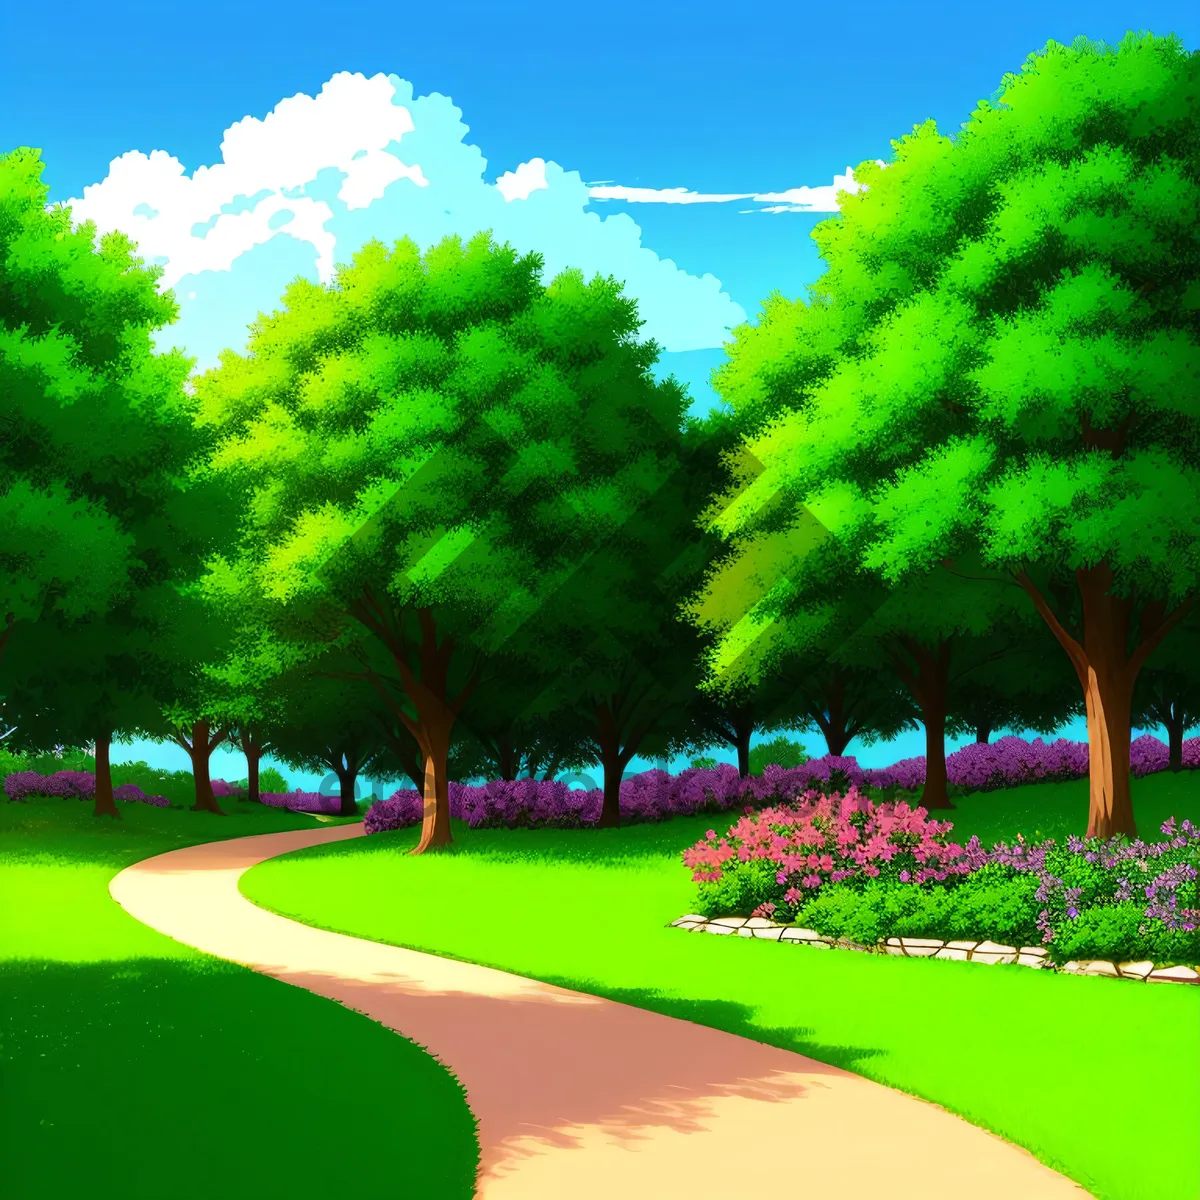 Picture of Gorgeous Golf Course Landscape with Majestic Trees